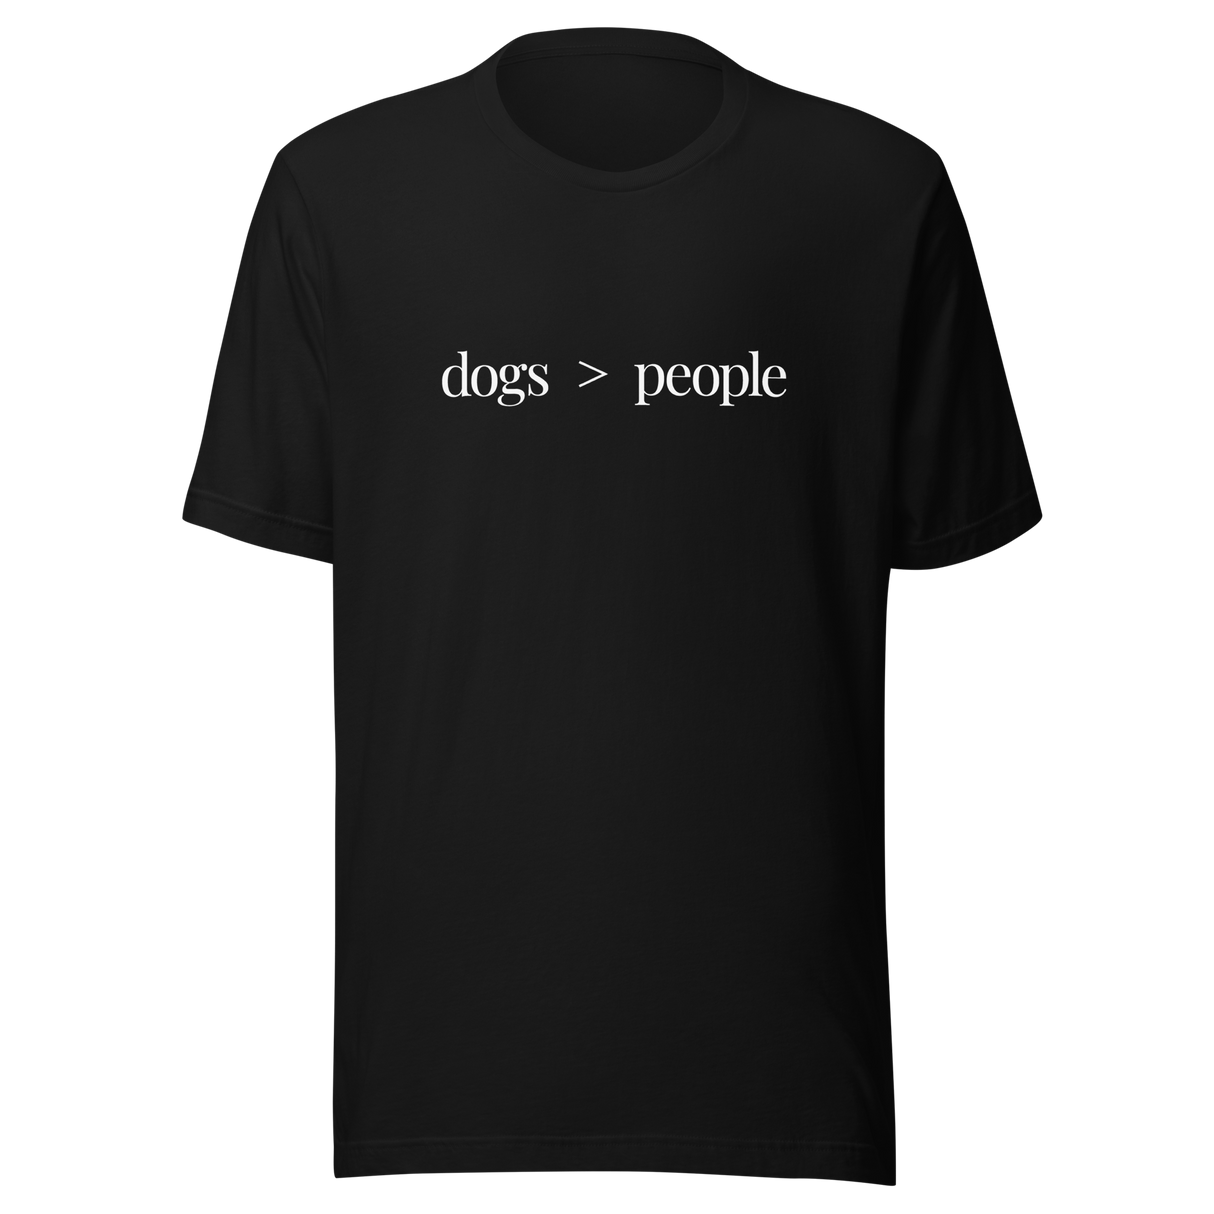 Dogs Are Greater Than People - Dog Tee - People T-Shirt - Greater Than Tee - Dog Lover T-Shirt - Dog Mom Tee